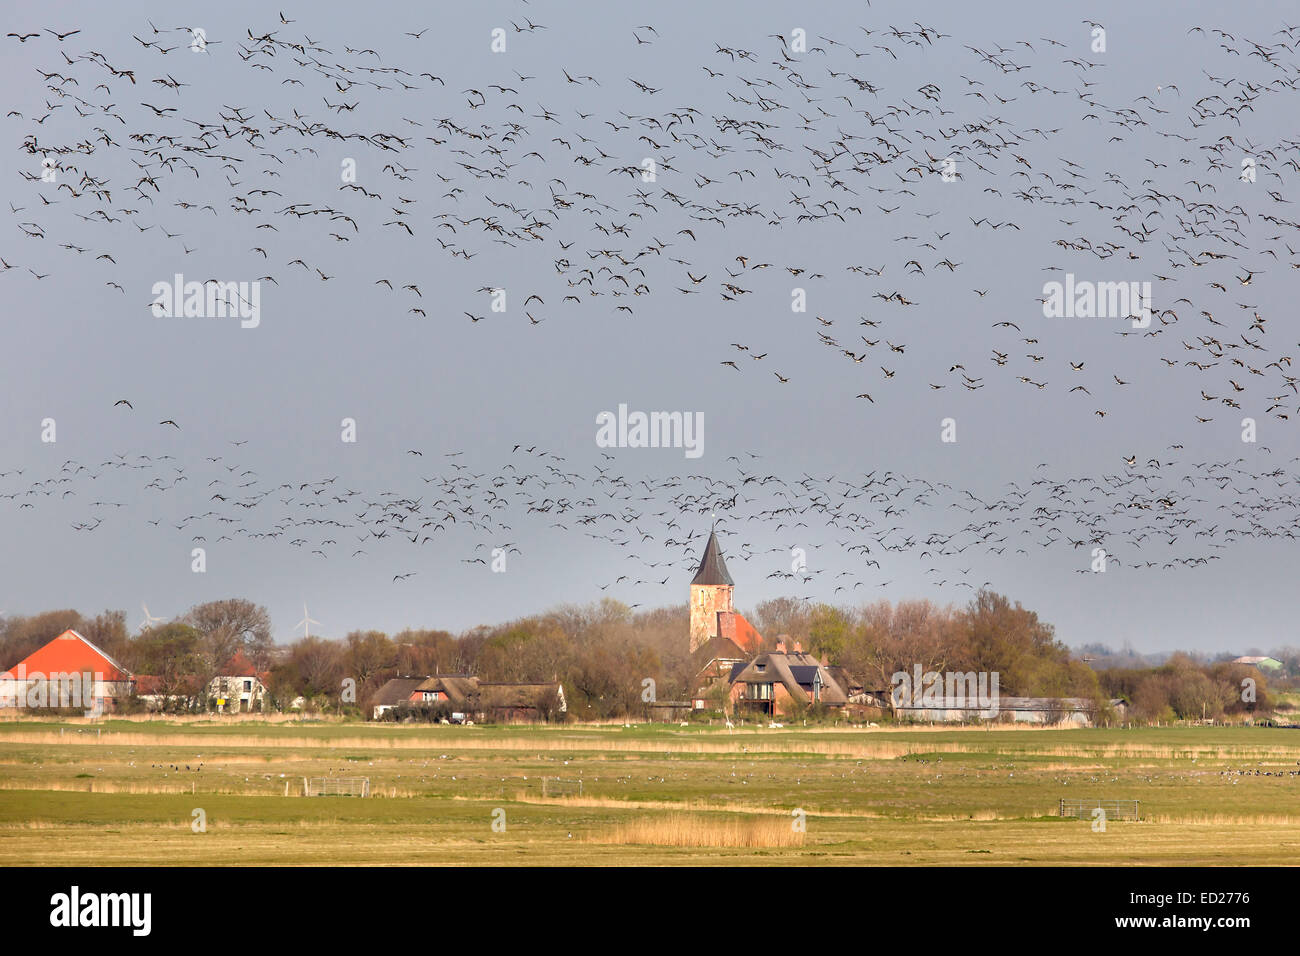 Swarm of geese at Westerhever, North Frisia, Germany, Europe Stock Photo